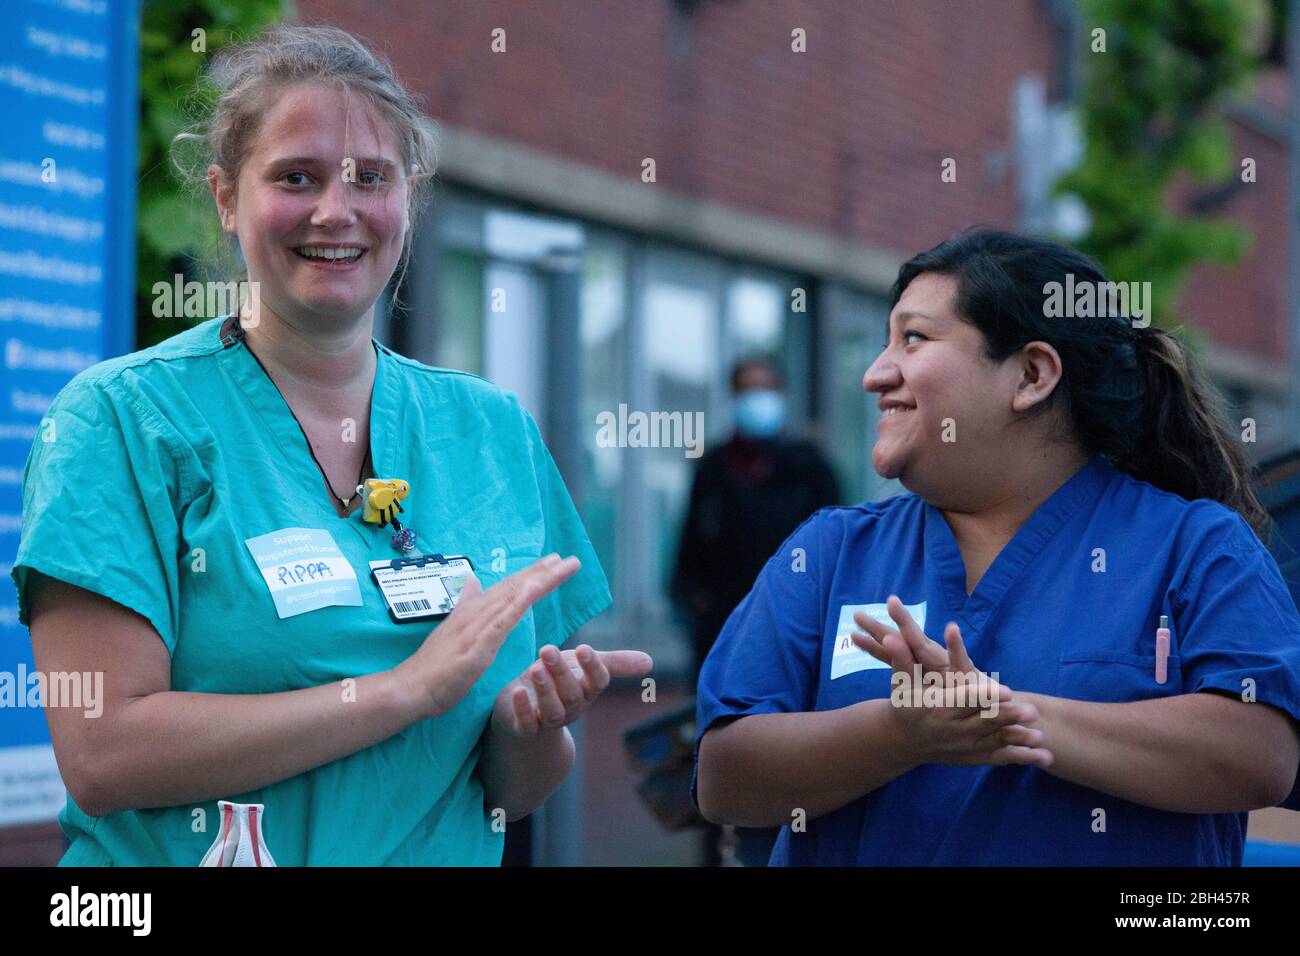 London, UK, 23 April 2020: medical and support staff gathered at the A&E ambulance bay at St George's Hospital, Tooting, to join Clap For Our Carers. Anna Watson/Alamy Live News Stock Photo